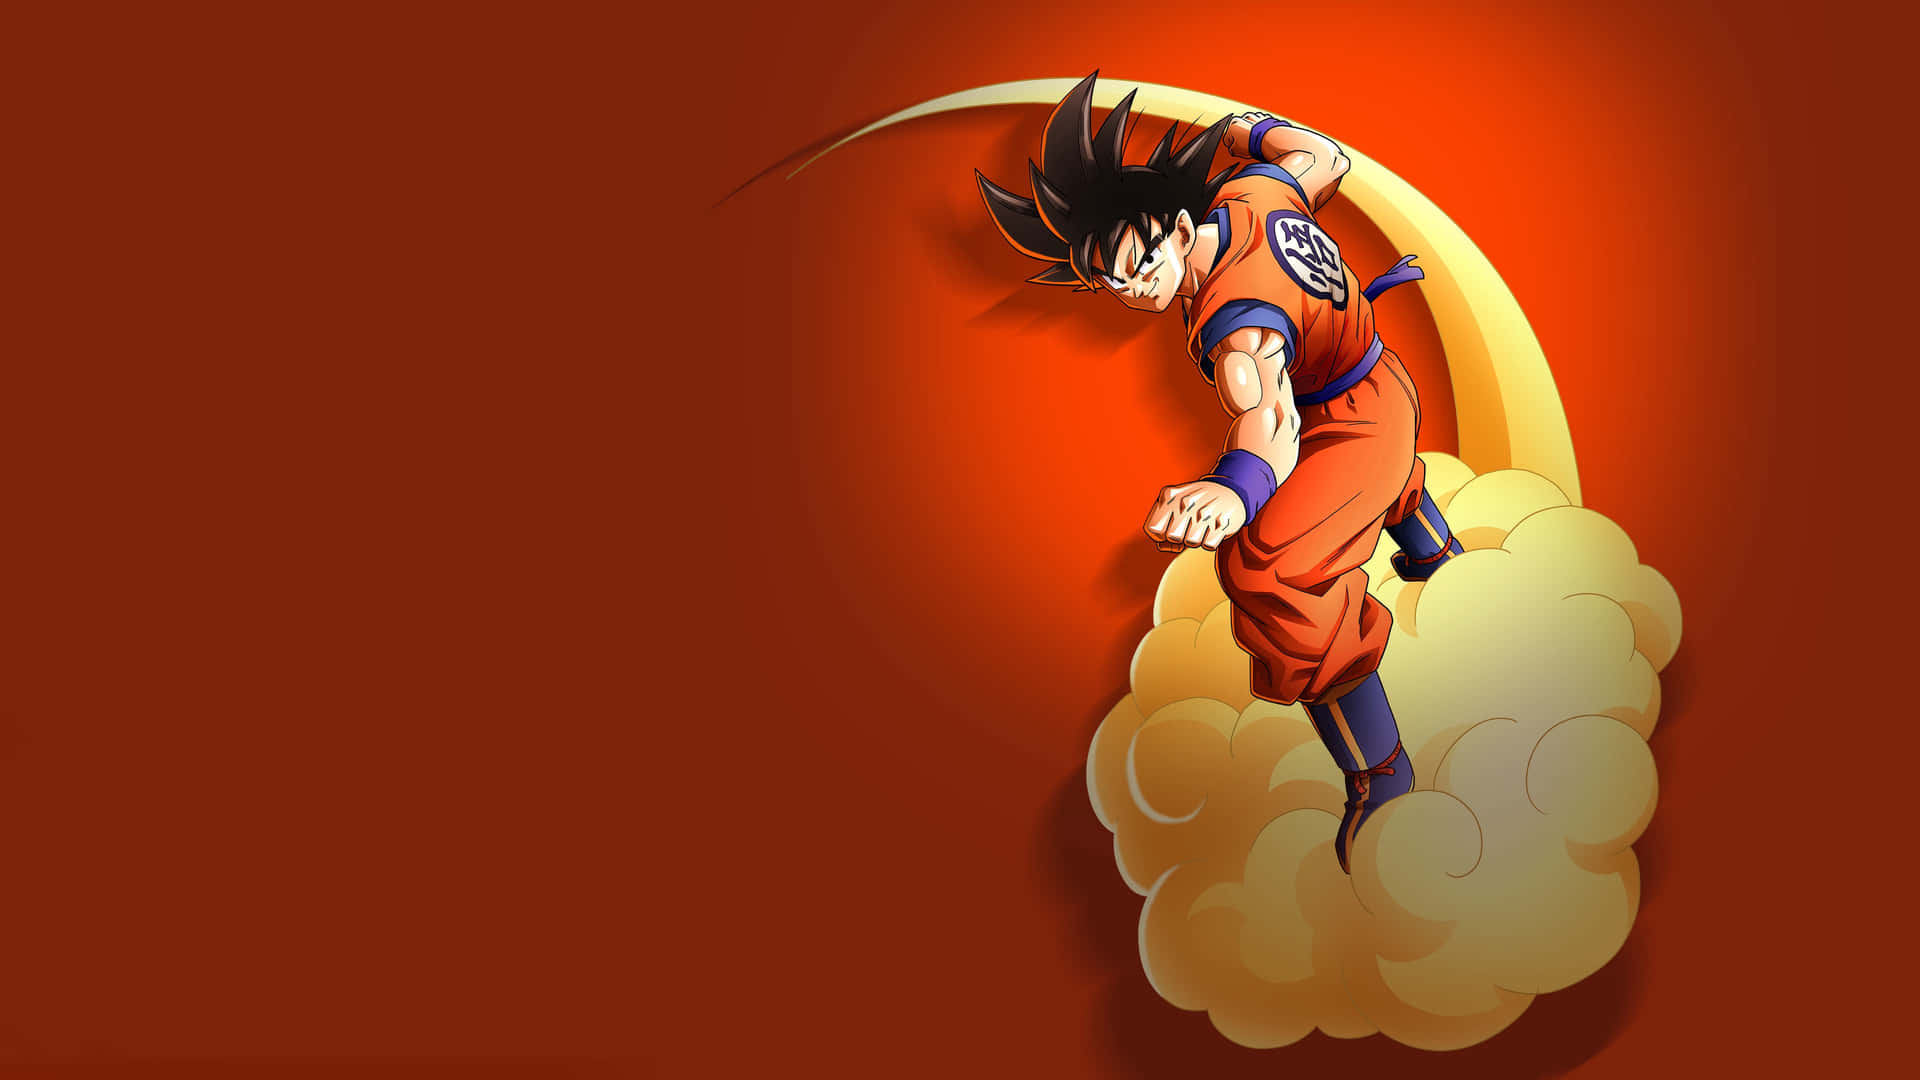 Great Goku Dragonball Z Pictures